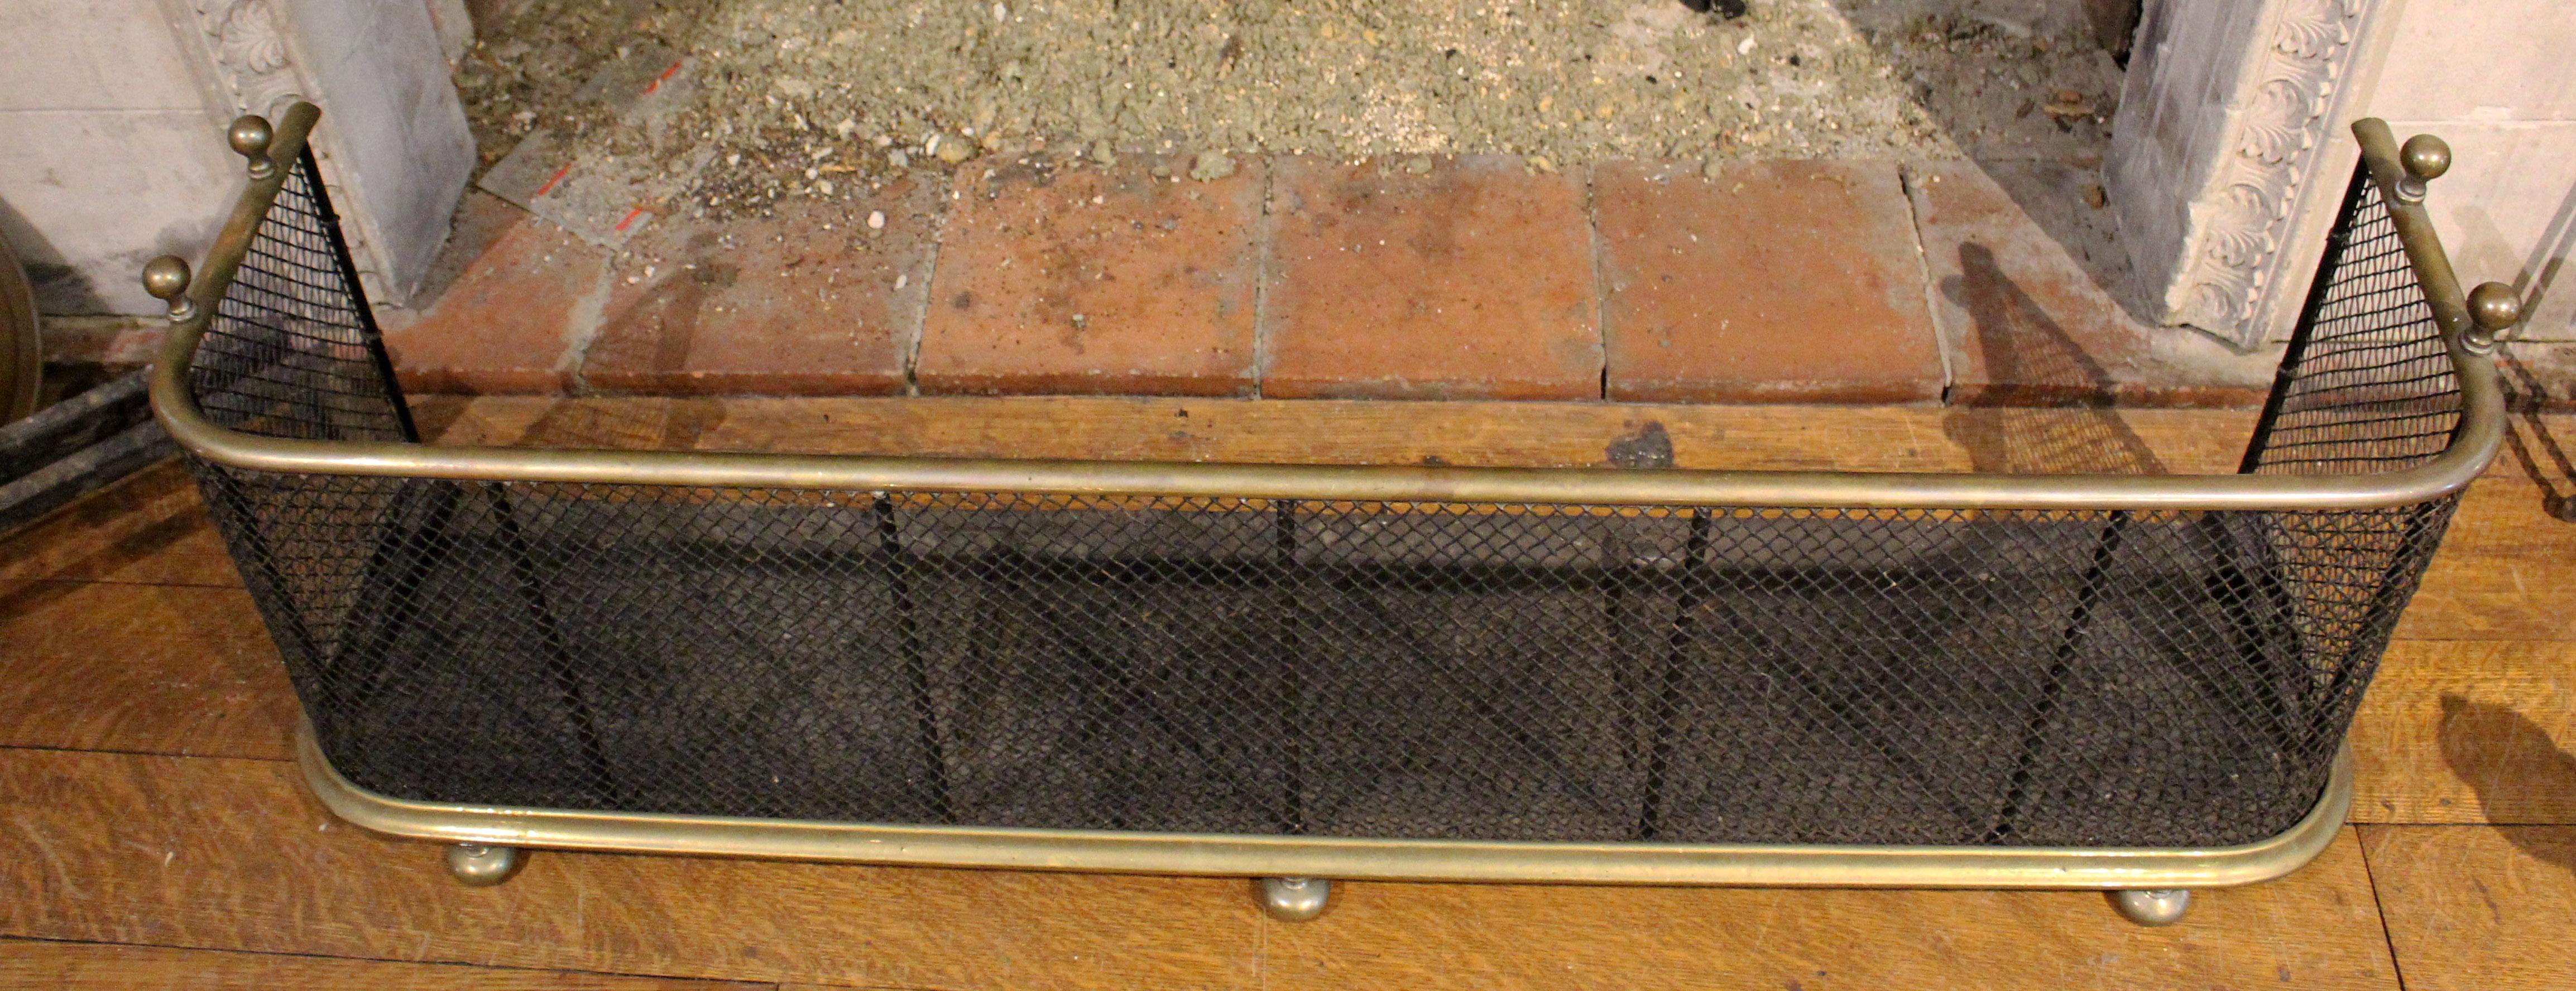 A very good circa 1840-1860 English low nursery fender with brass trim, brass tool rests, woven wire & hearth guard.
48